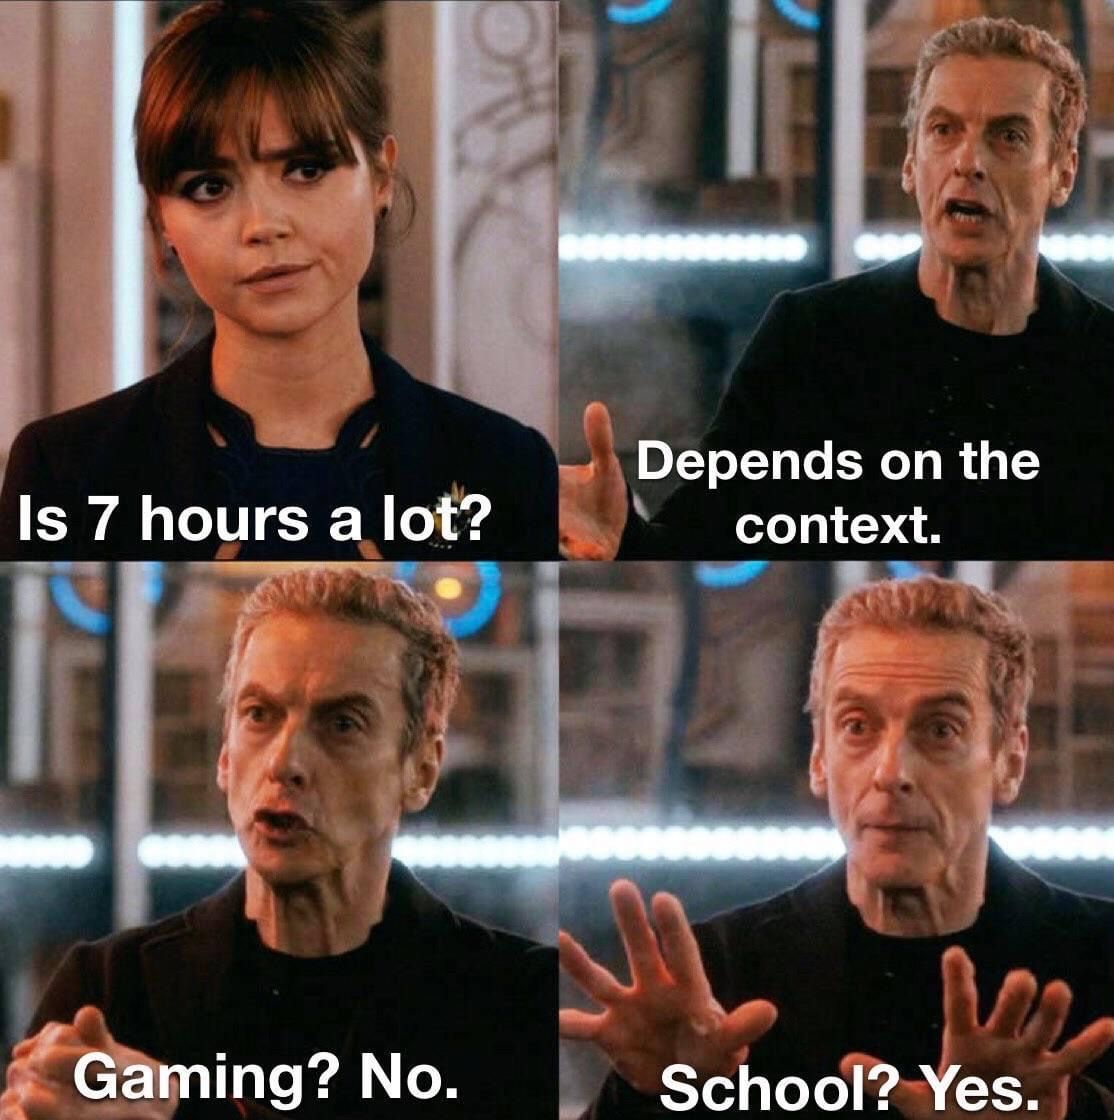 funny gaming memes - covid denier memes - Is 7 hours a lot? Depends on the context. Gaming? No. School? Yes.